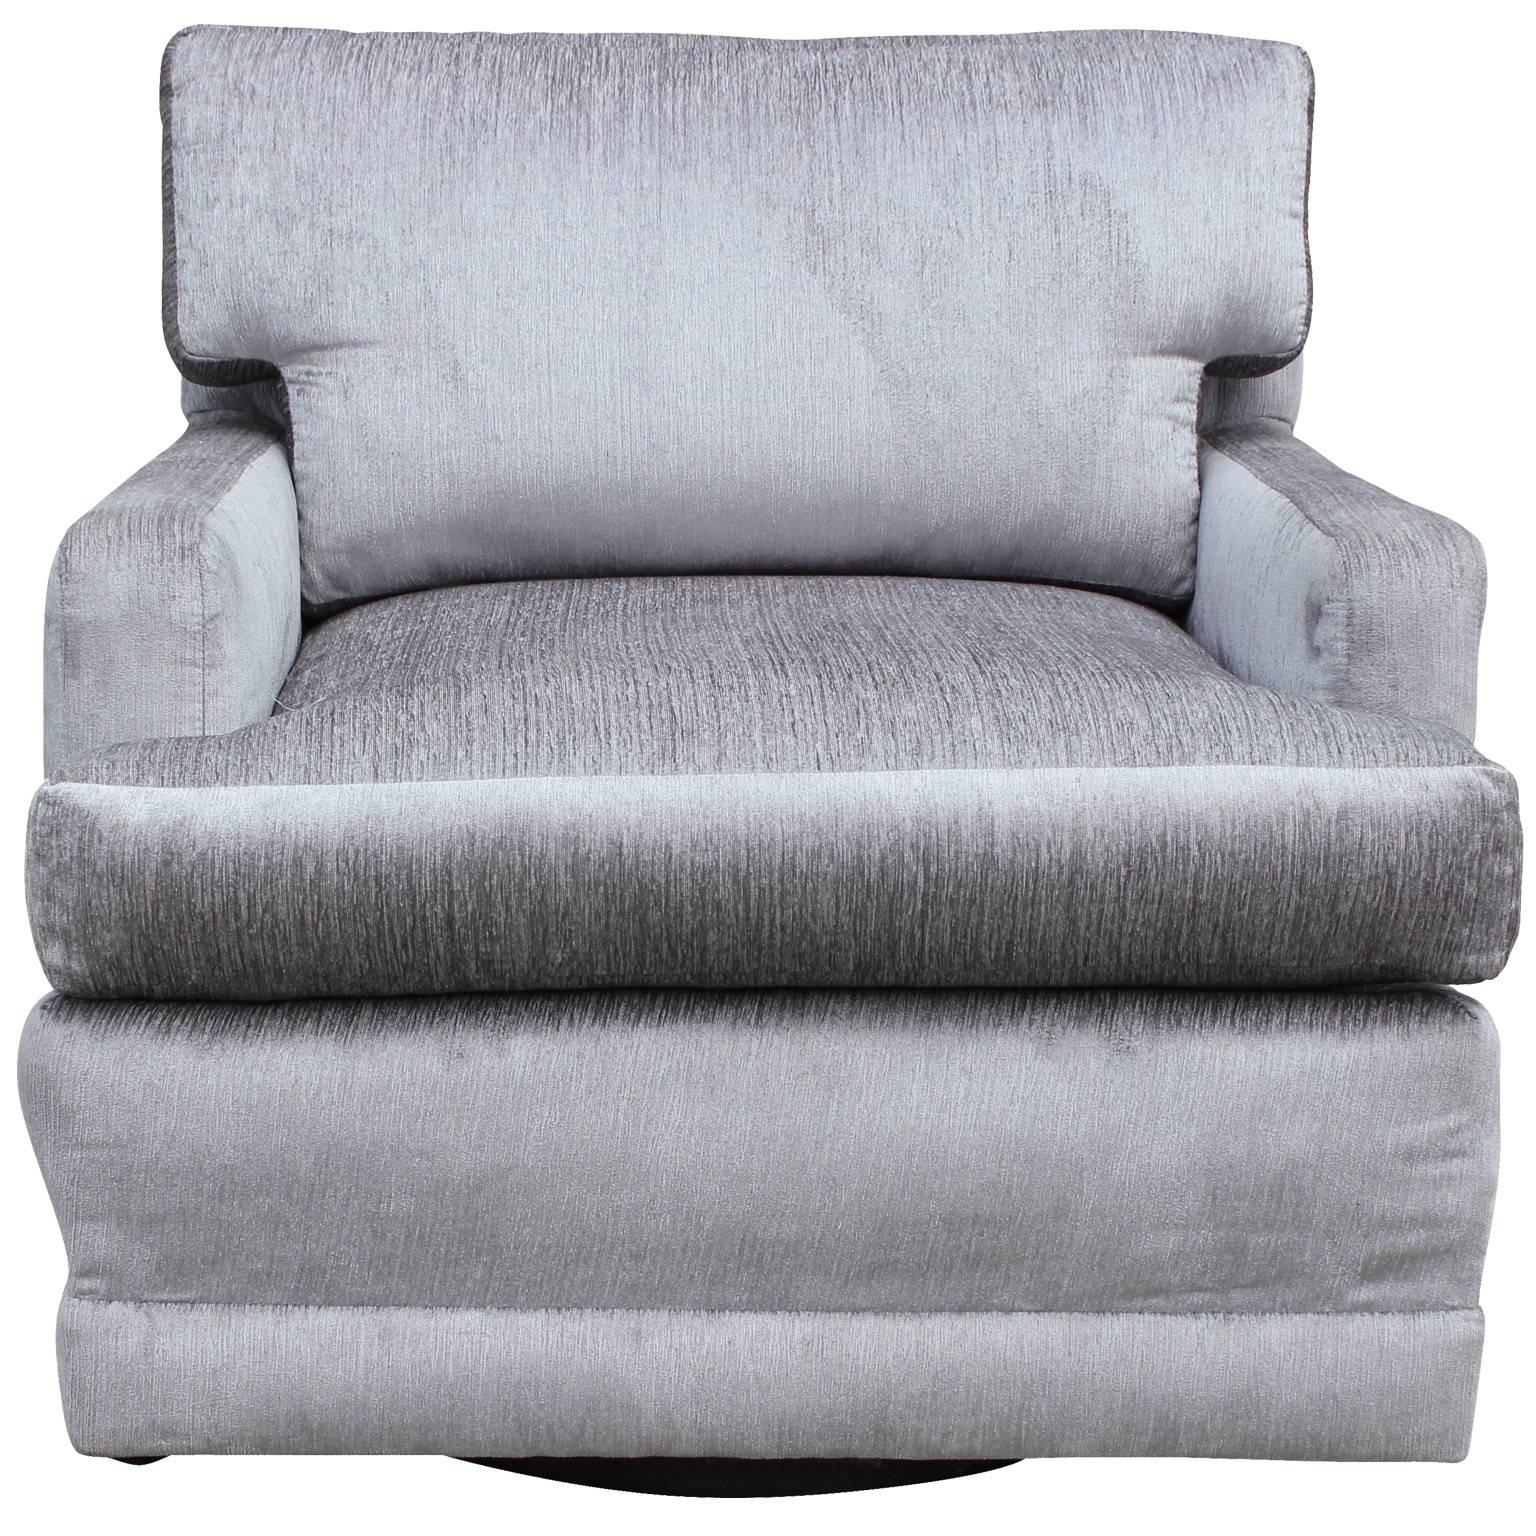 Gorgeous swivel lounge chair freshly upholstered in a luxe silver velvet. Chair pairs clean lines with dramatic upholstery creating a one of a kind piece.